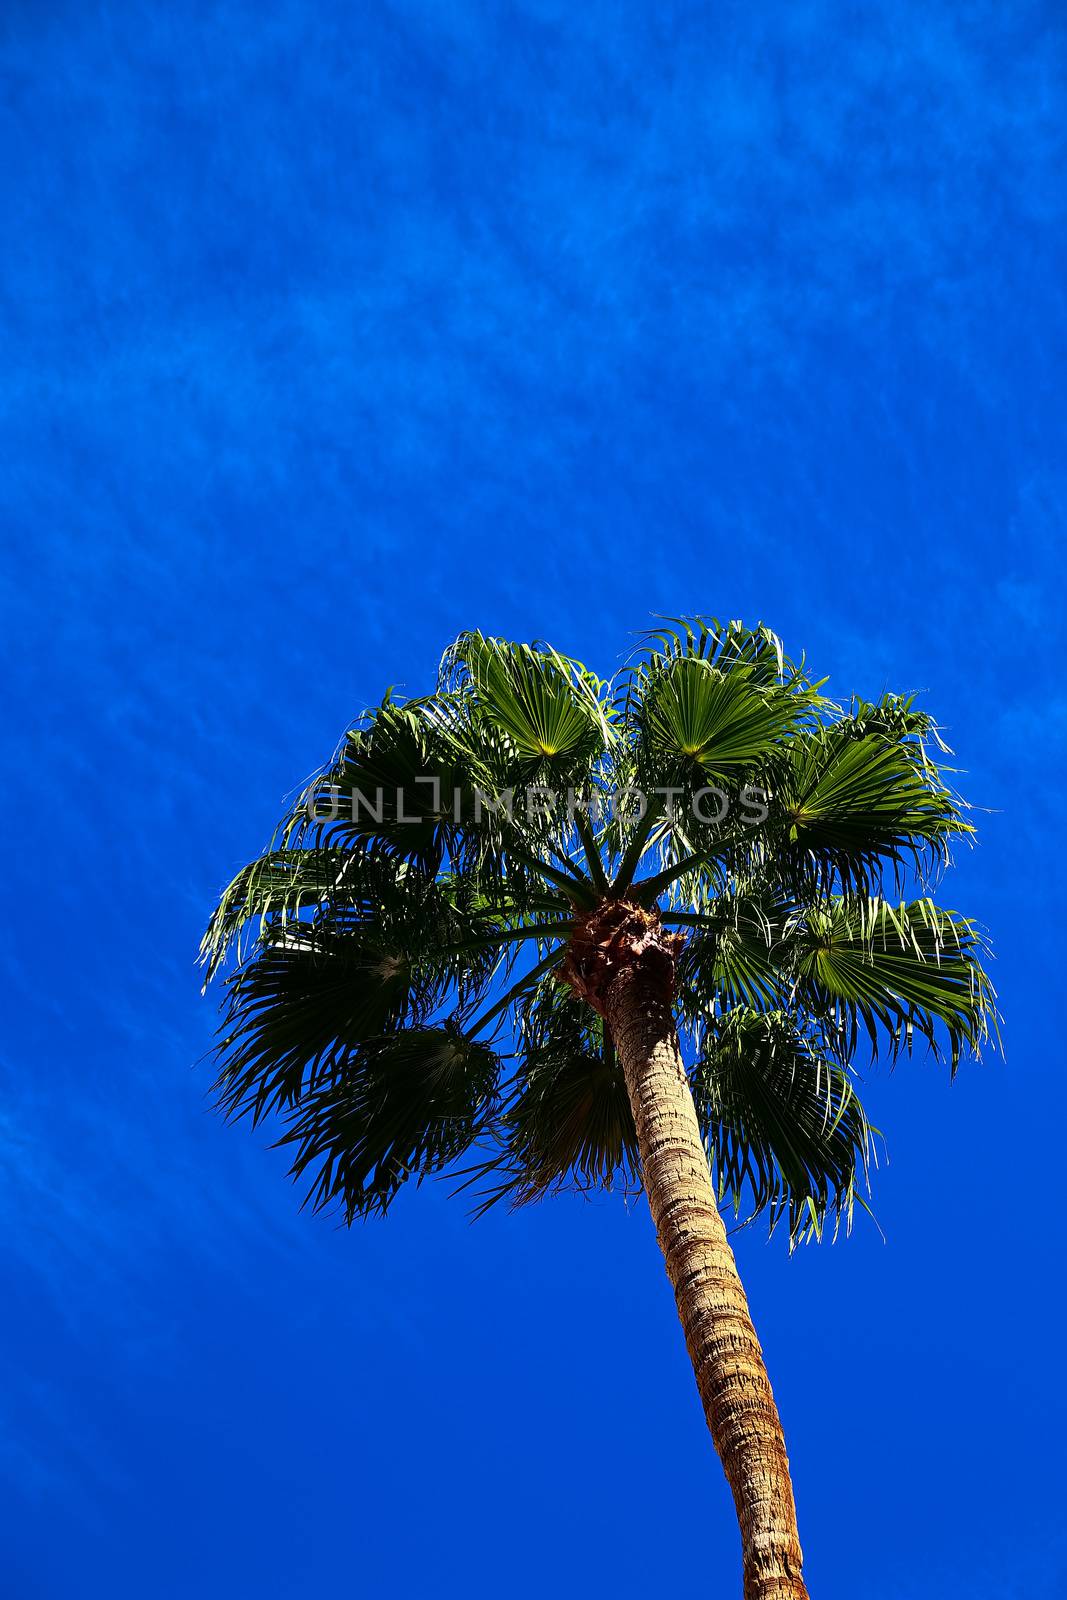 Classic Florida palm tree background of blue sky.Close up photo of a bunch of Coconut palm trees with blue sky background. by USA-TARO